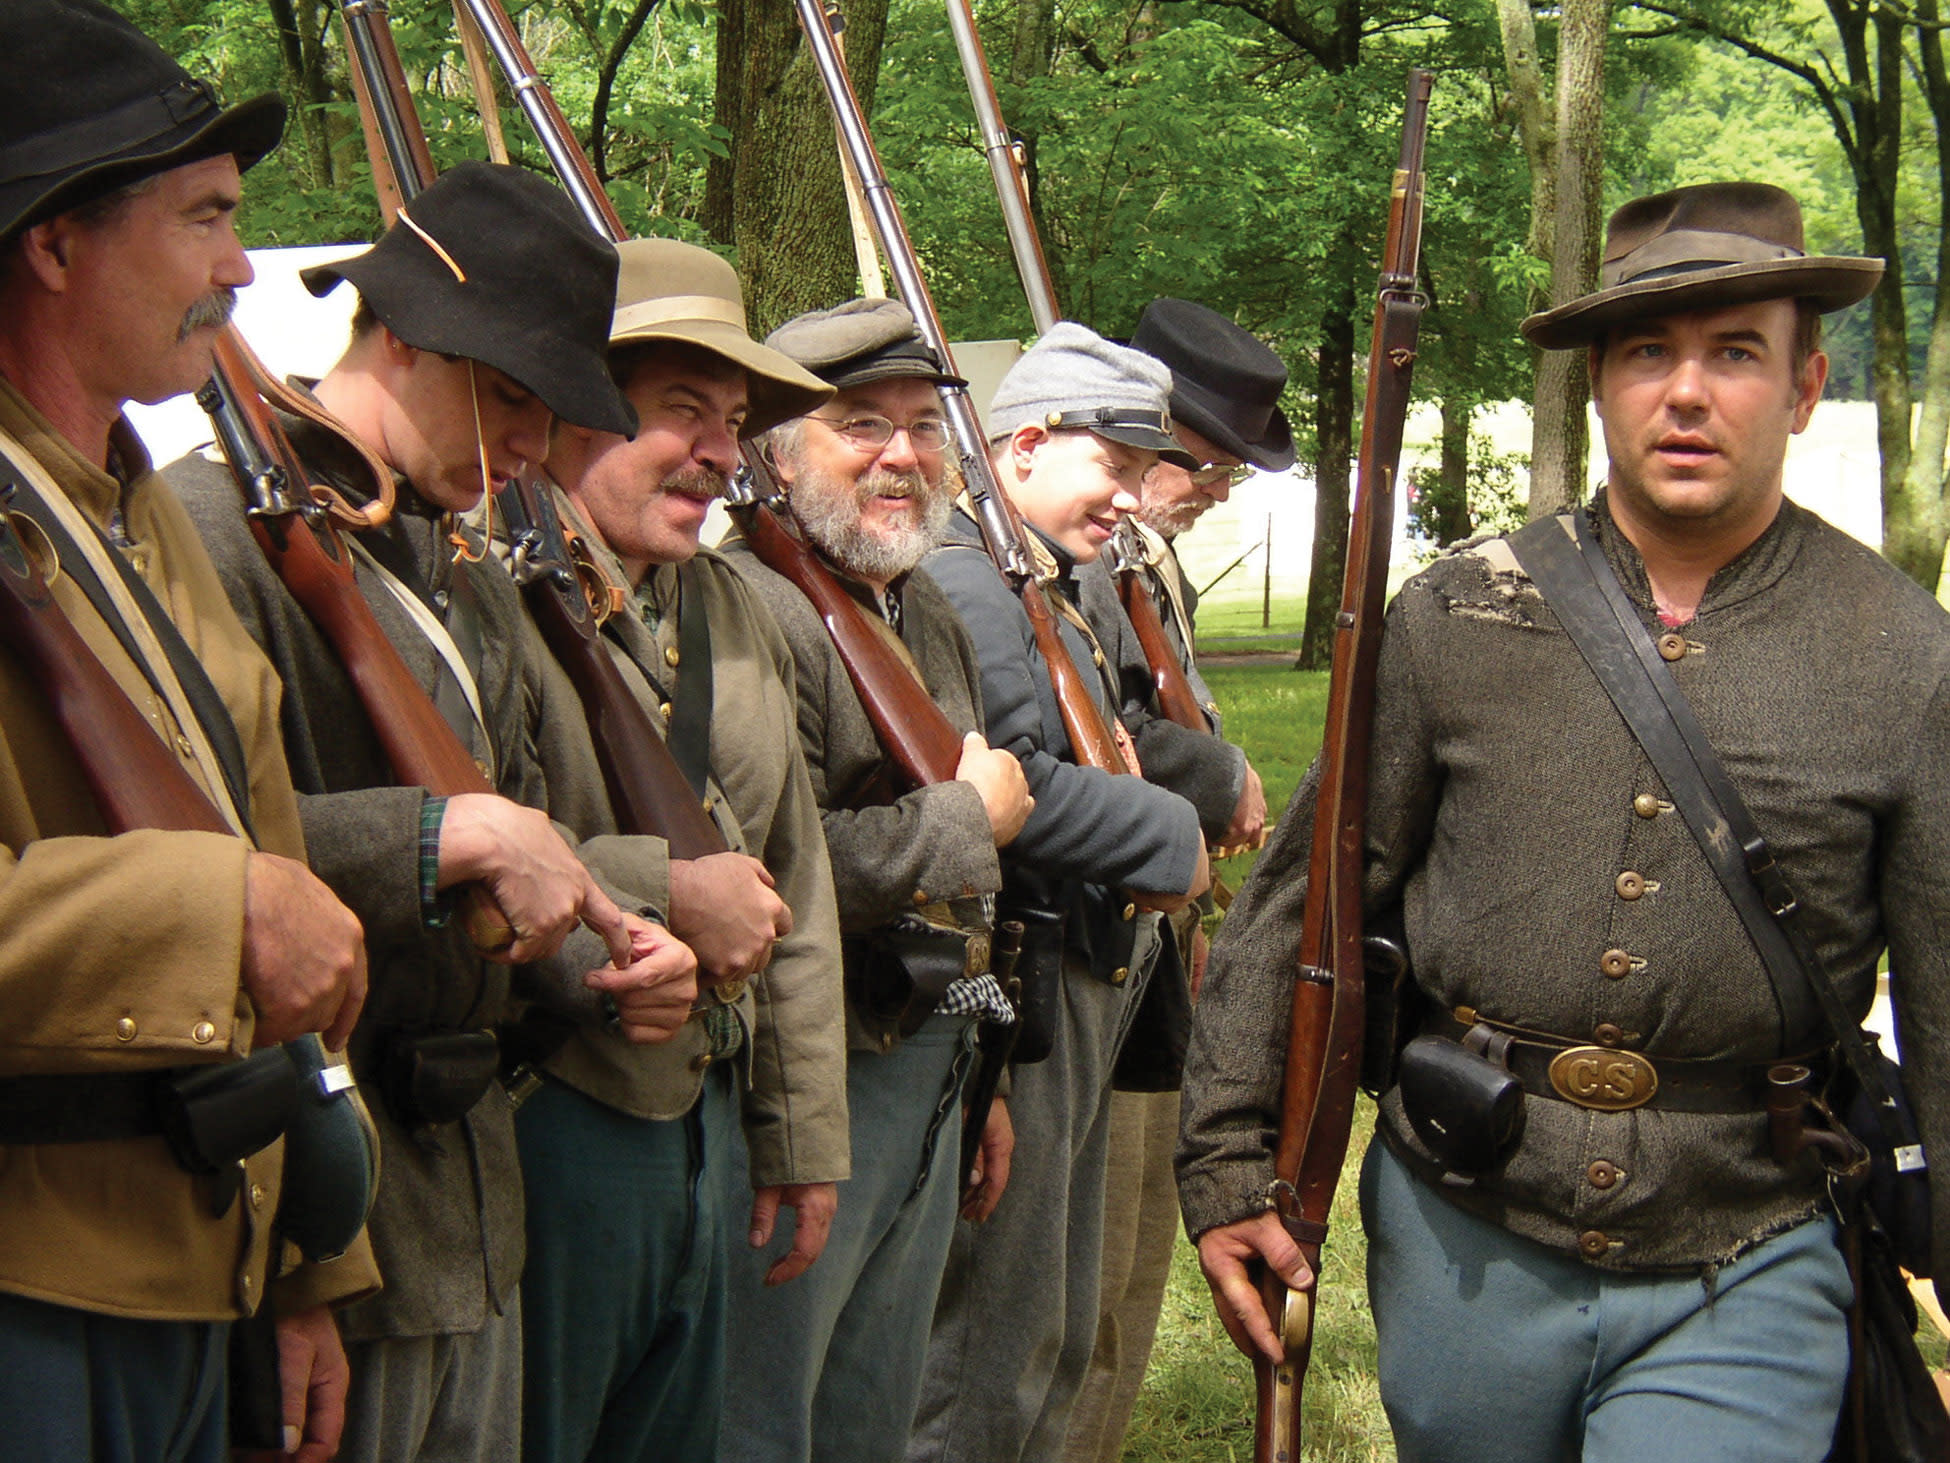 The Civil War comes to life at Pennypacker Mills this weekend.